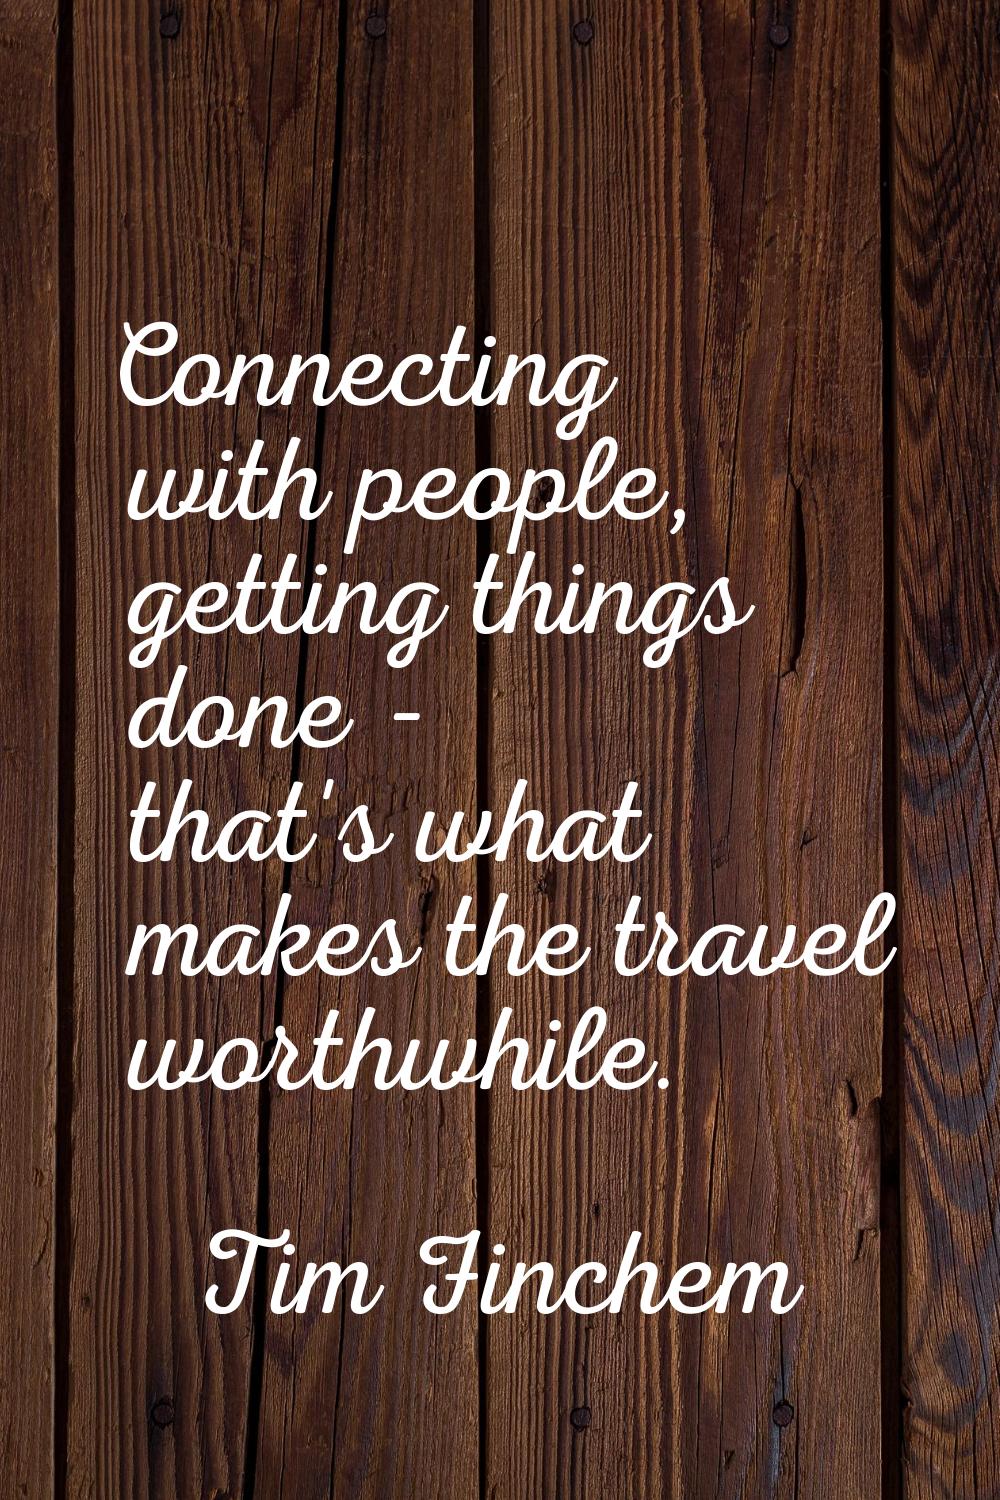 Connecting with people, getting things done - that's what makes the travel worthwhile.